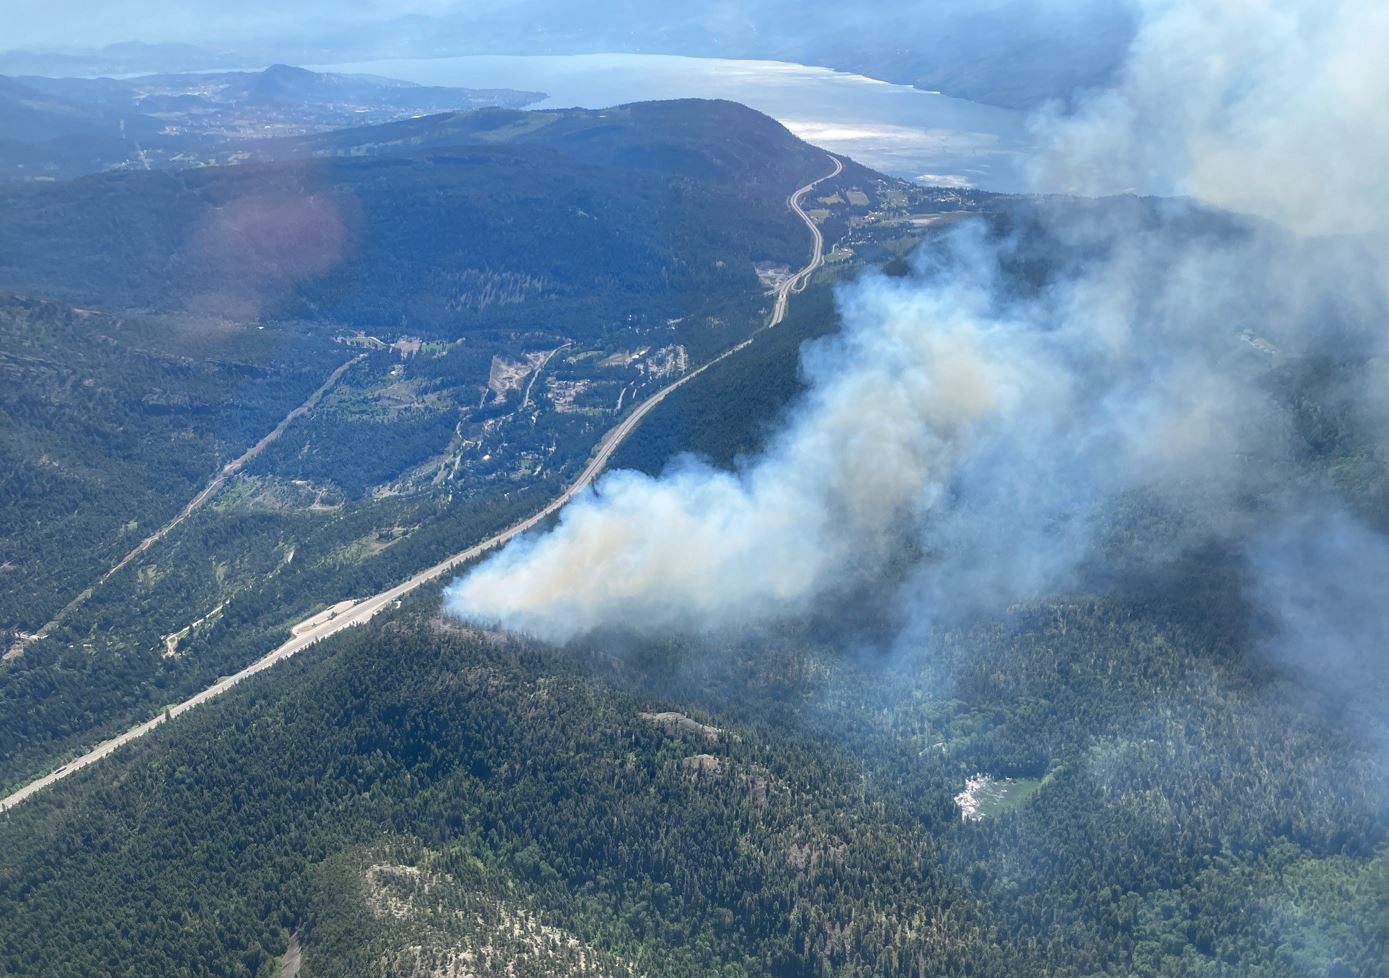 Aerial view of the Pigeon Creek wildfire near Peachland, British Columbia, Canada